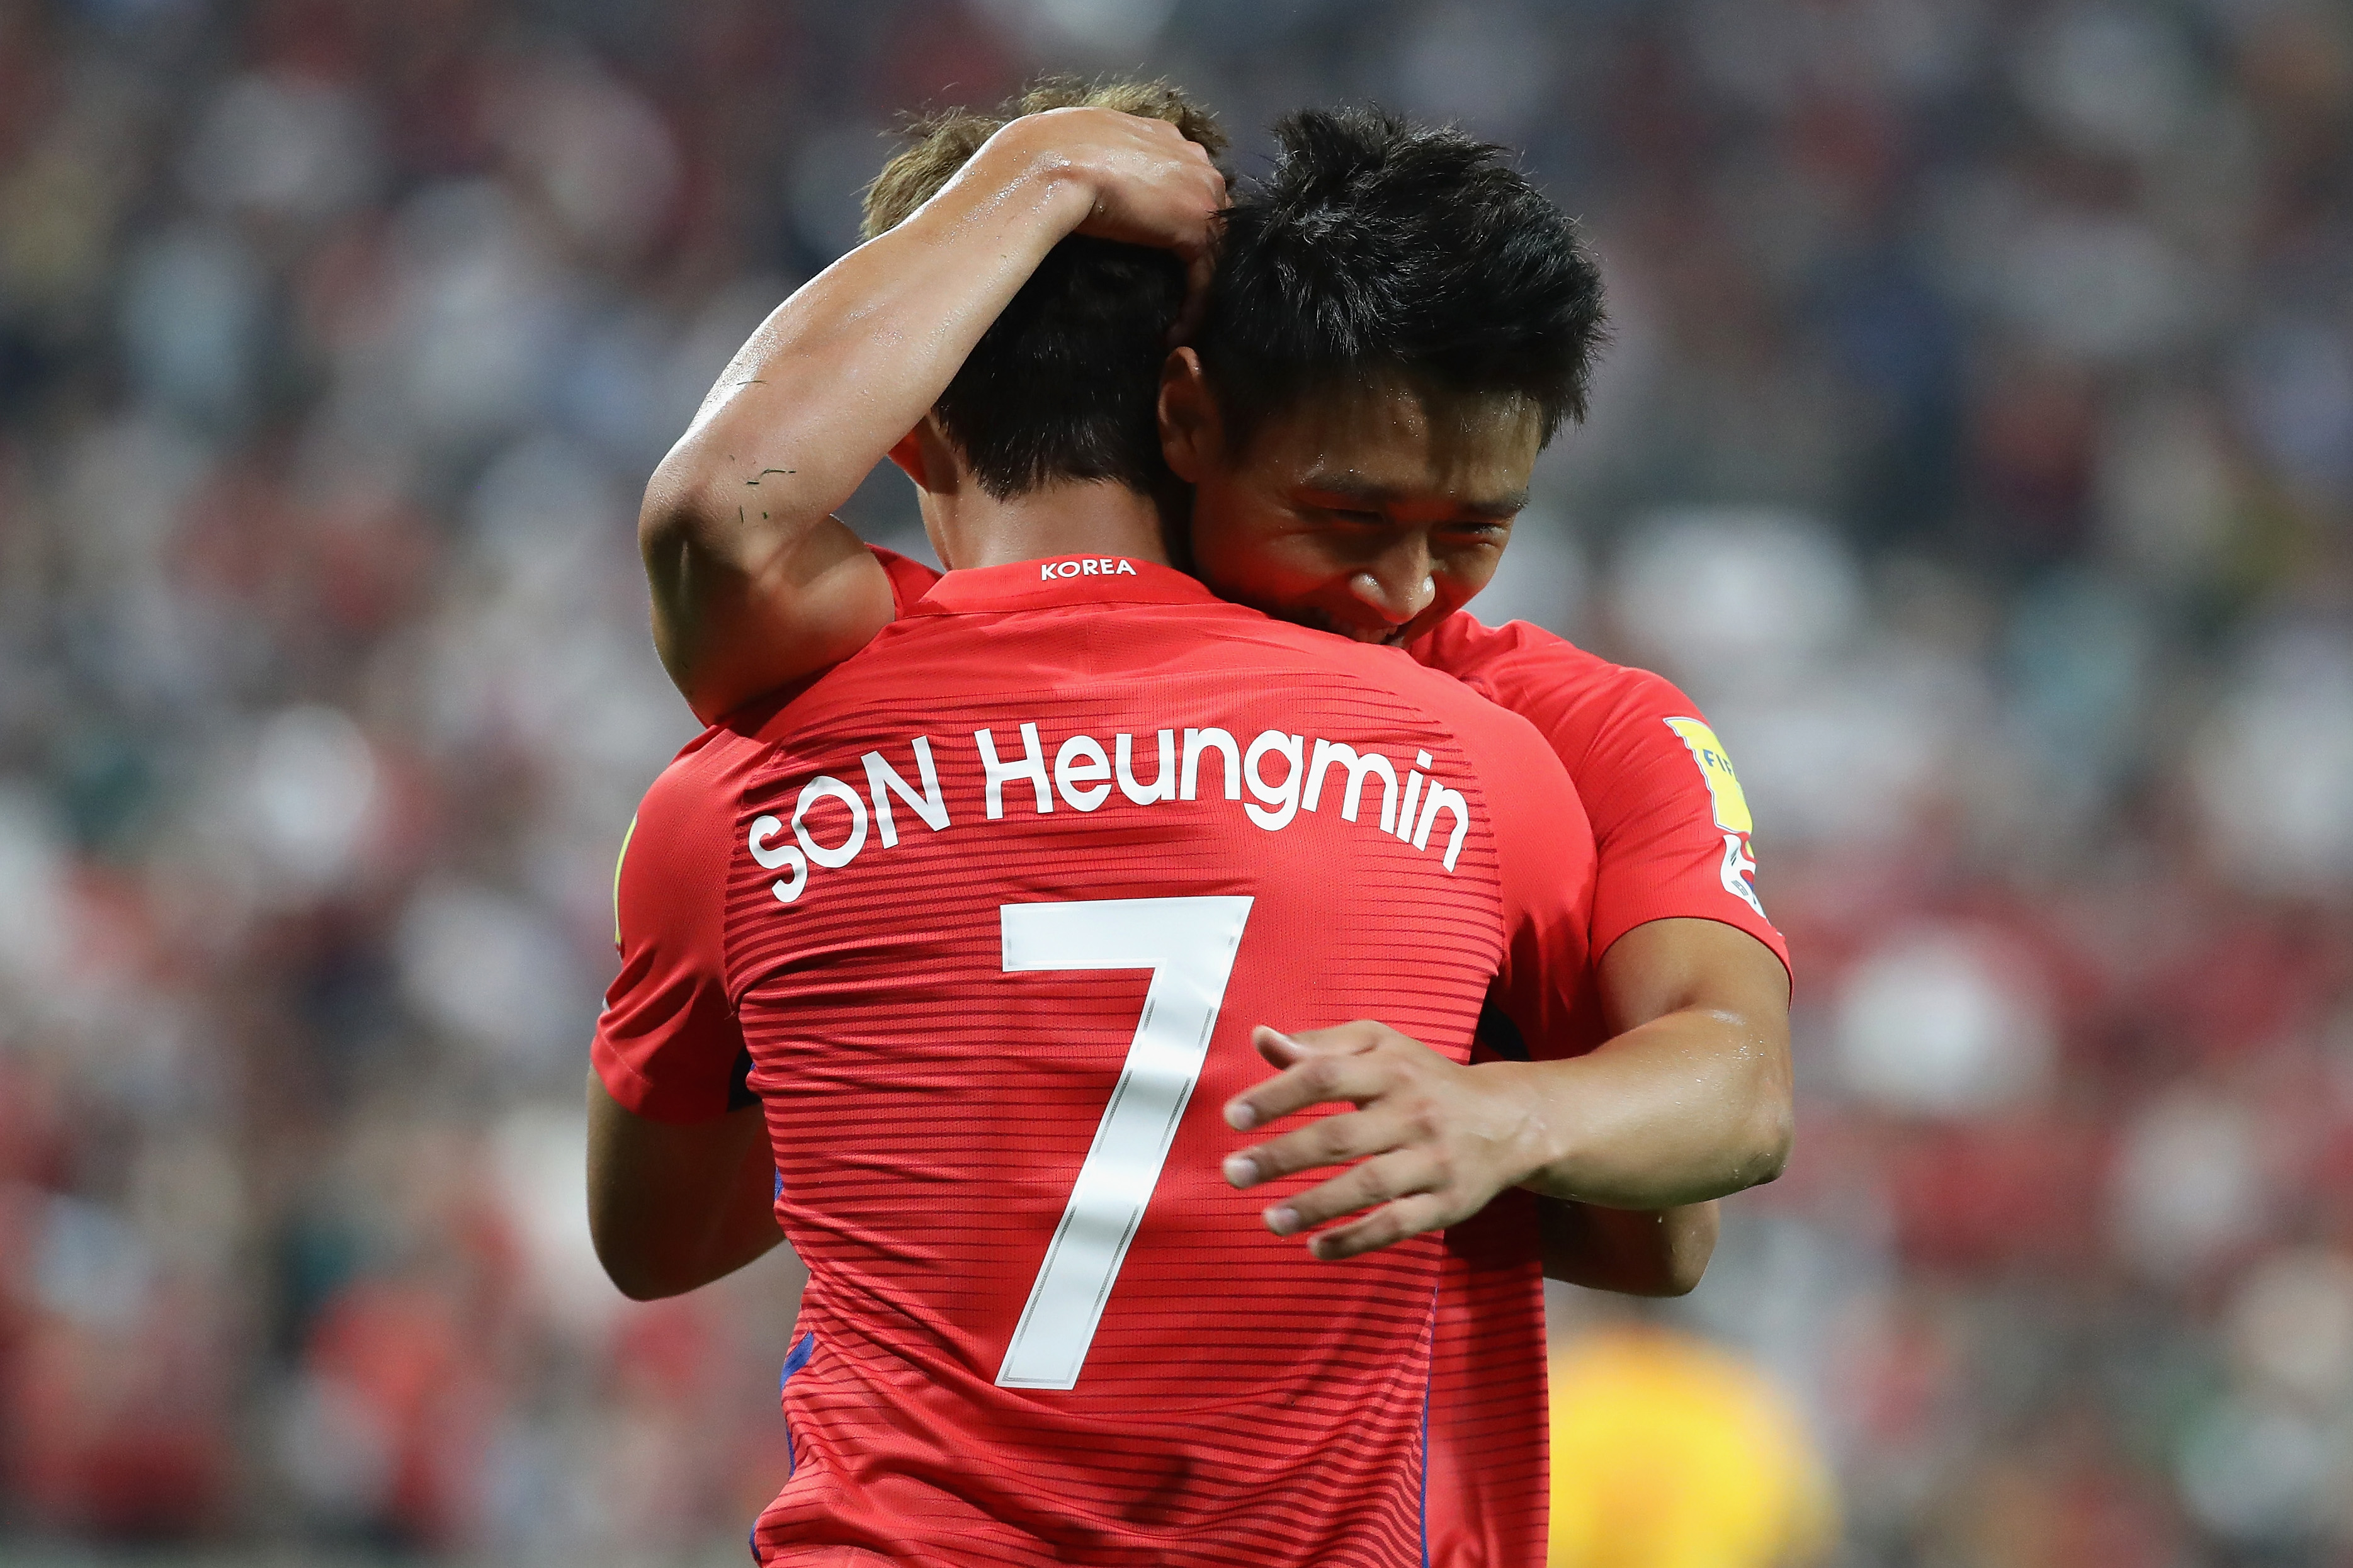 Son Heung-min's scoring streak ends at 3 matches in Tottenham's